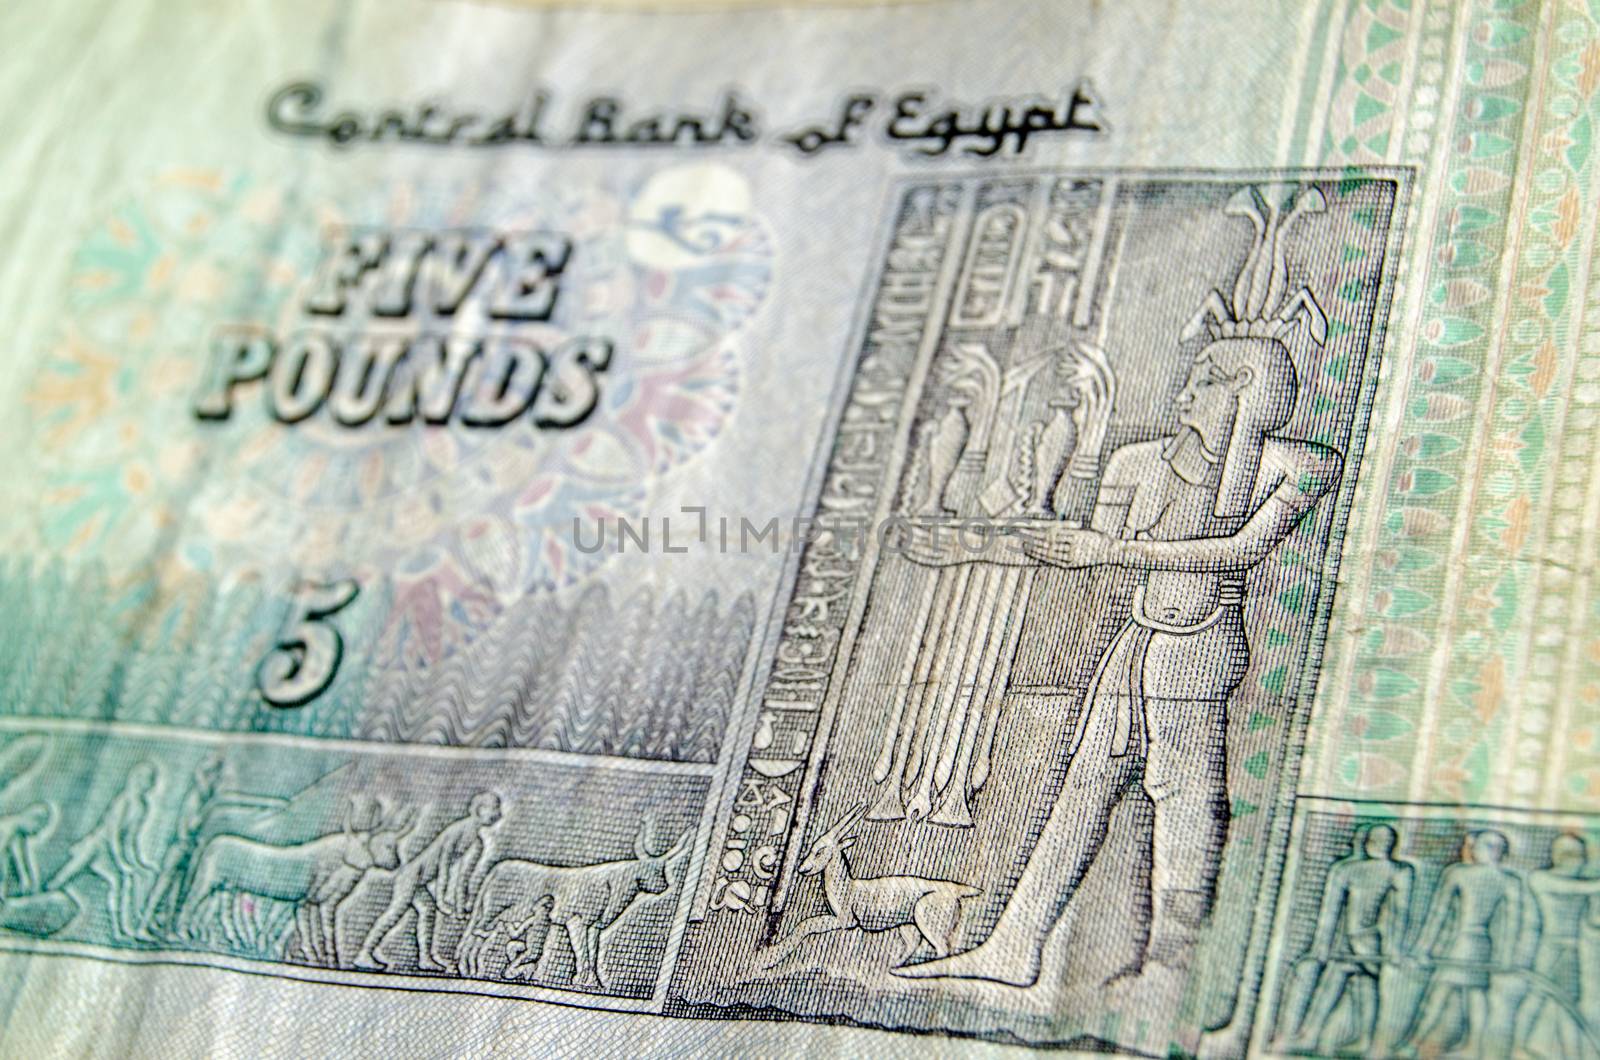 The Ancient Egyptian god Hapi, representing the bounty of the Nile, on the front of a five pound banknote from Egypt.  Used banknote, photographed at an angle.